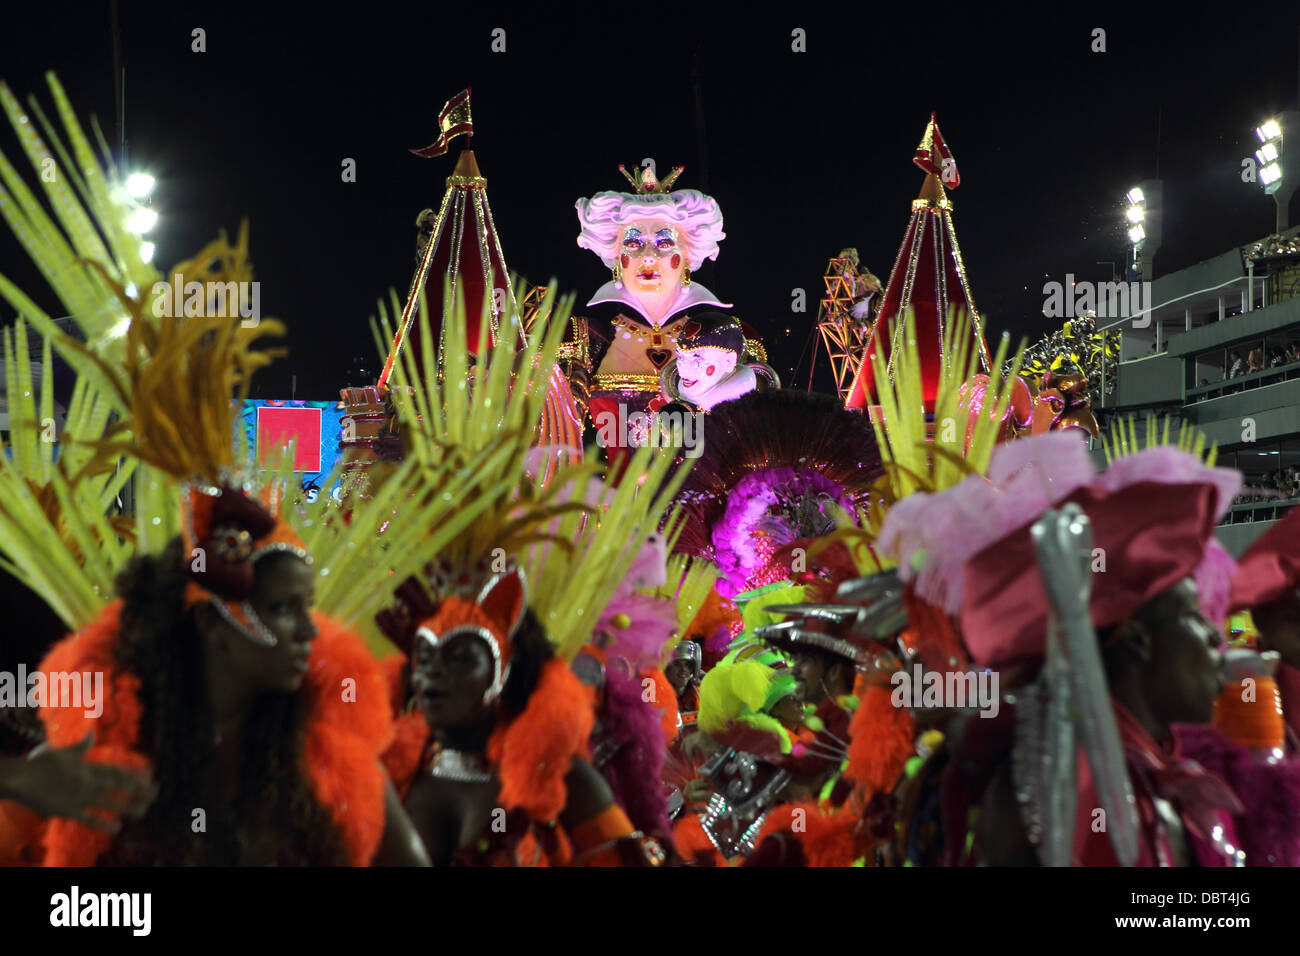 A float of a giant queen lead by dancers on the Sambodromo during Carnival, Rio de Janeiro, Brazil on Monday, 11 February 2013. Stock Photo